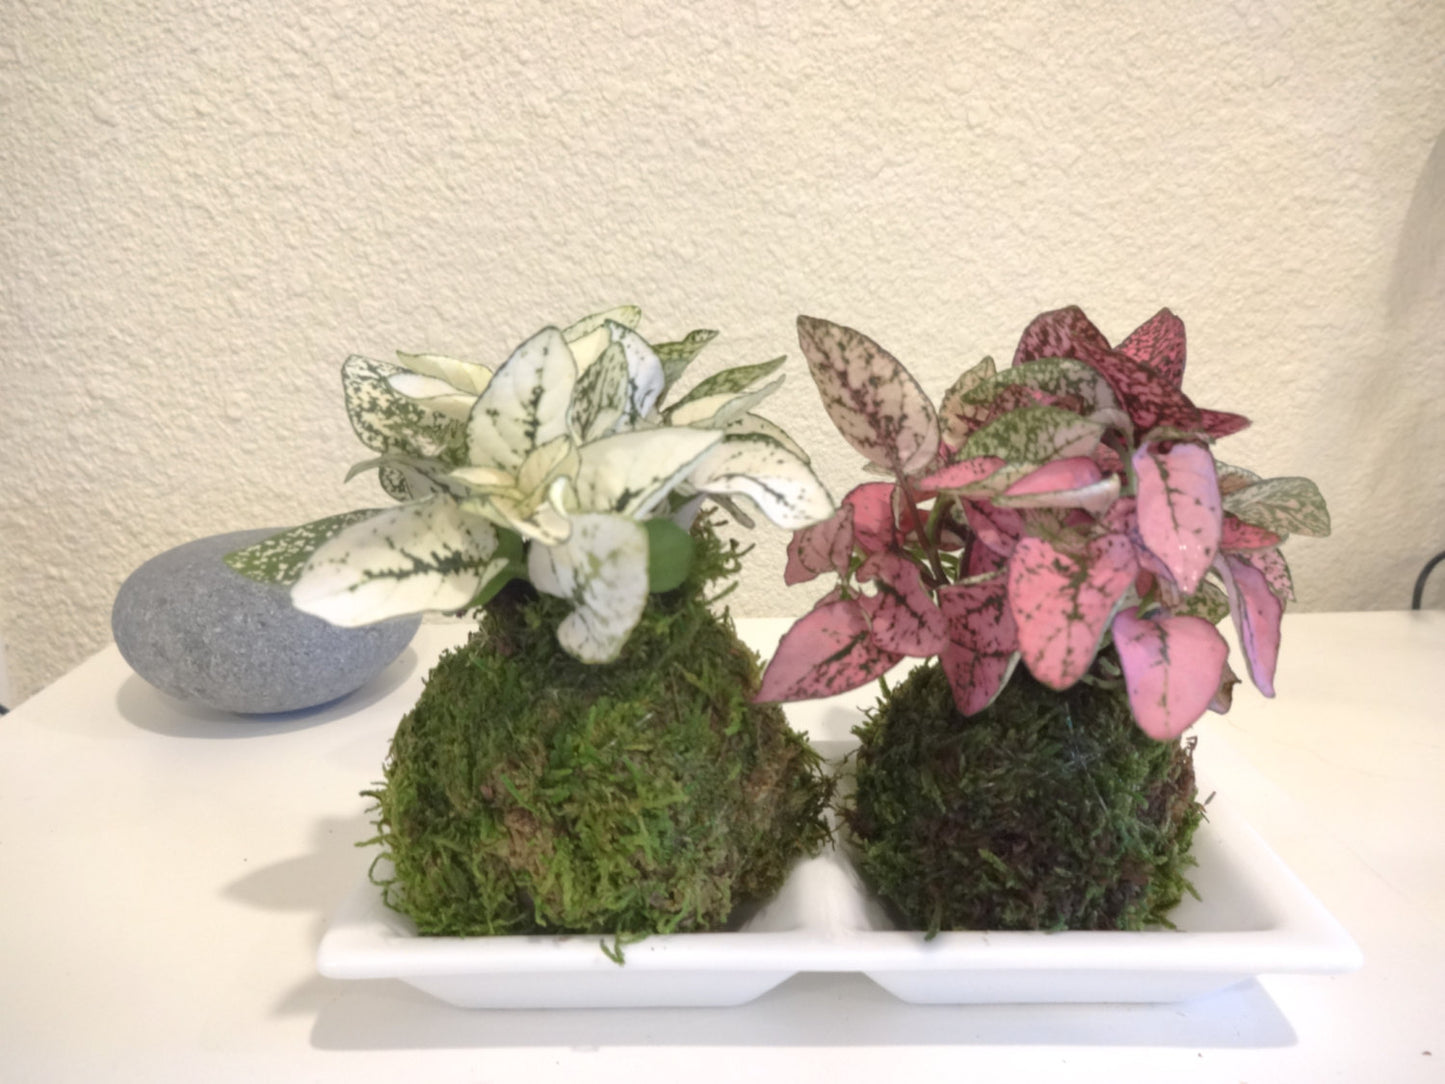 Polka dot - Hypoestes pair of pink and white Kokedamas - Mini Moss ball 2 x 2 x 4 inch tall each.